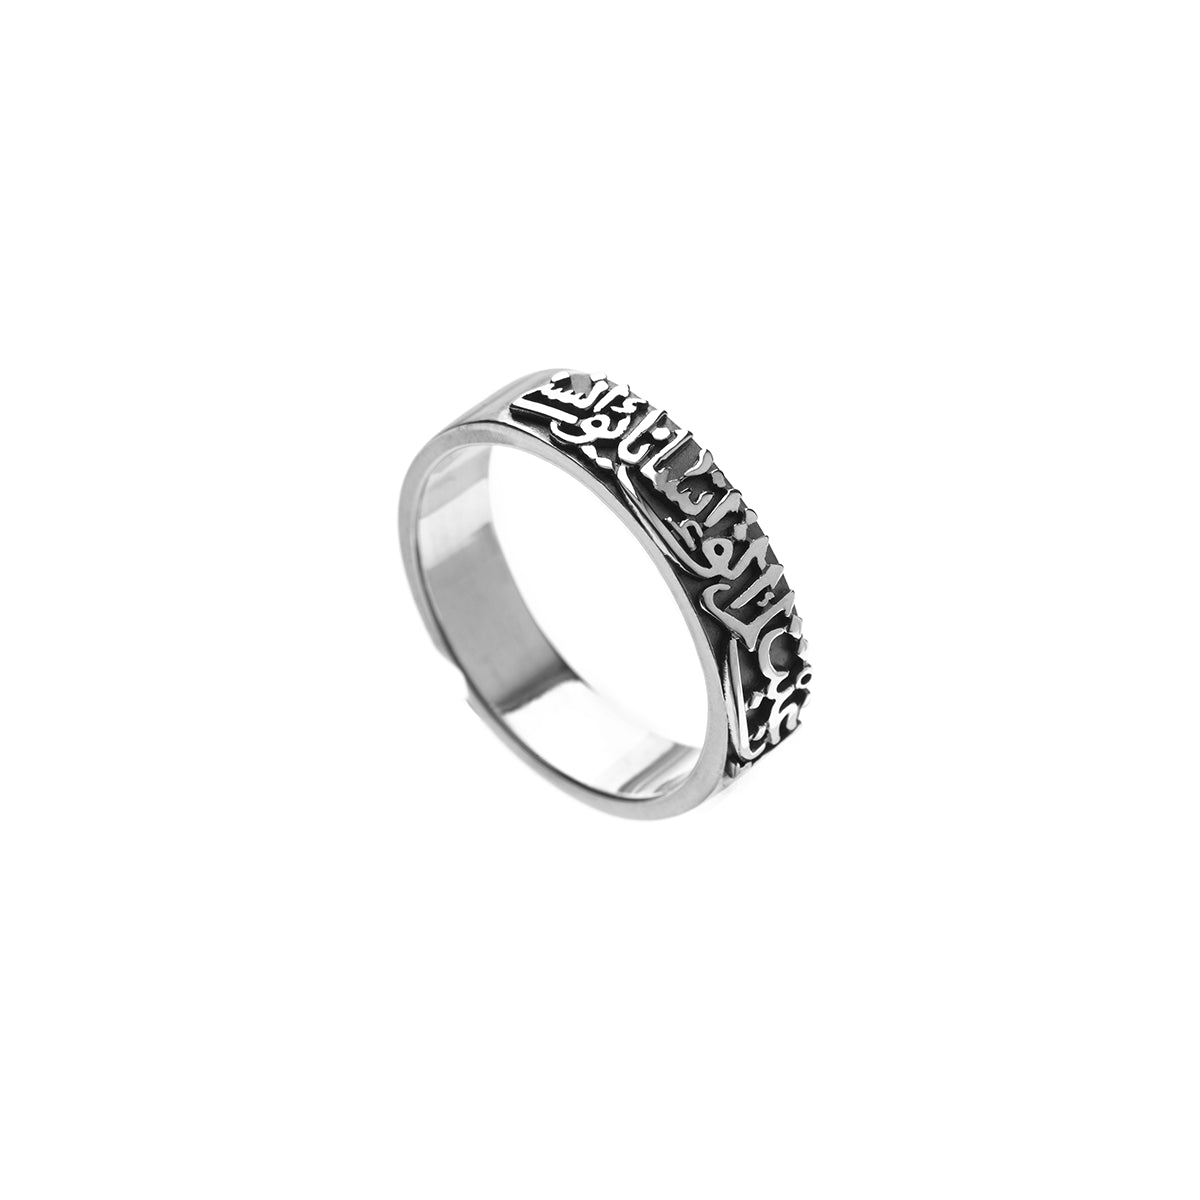 Calligraphy Band For Him by Azza Fahmy - Designer Rings